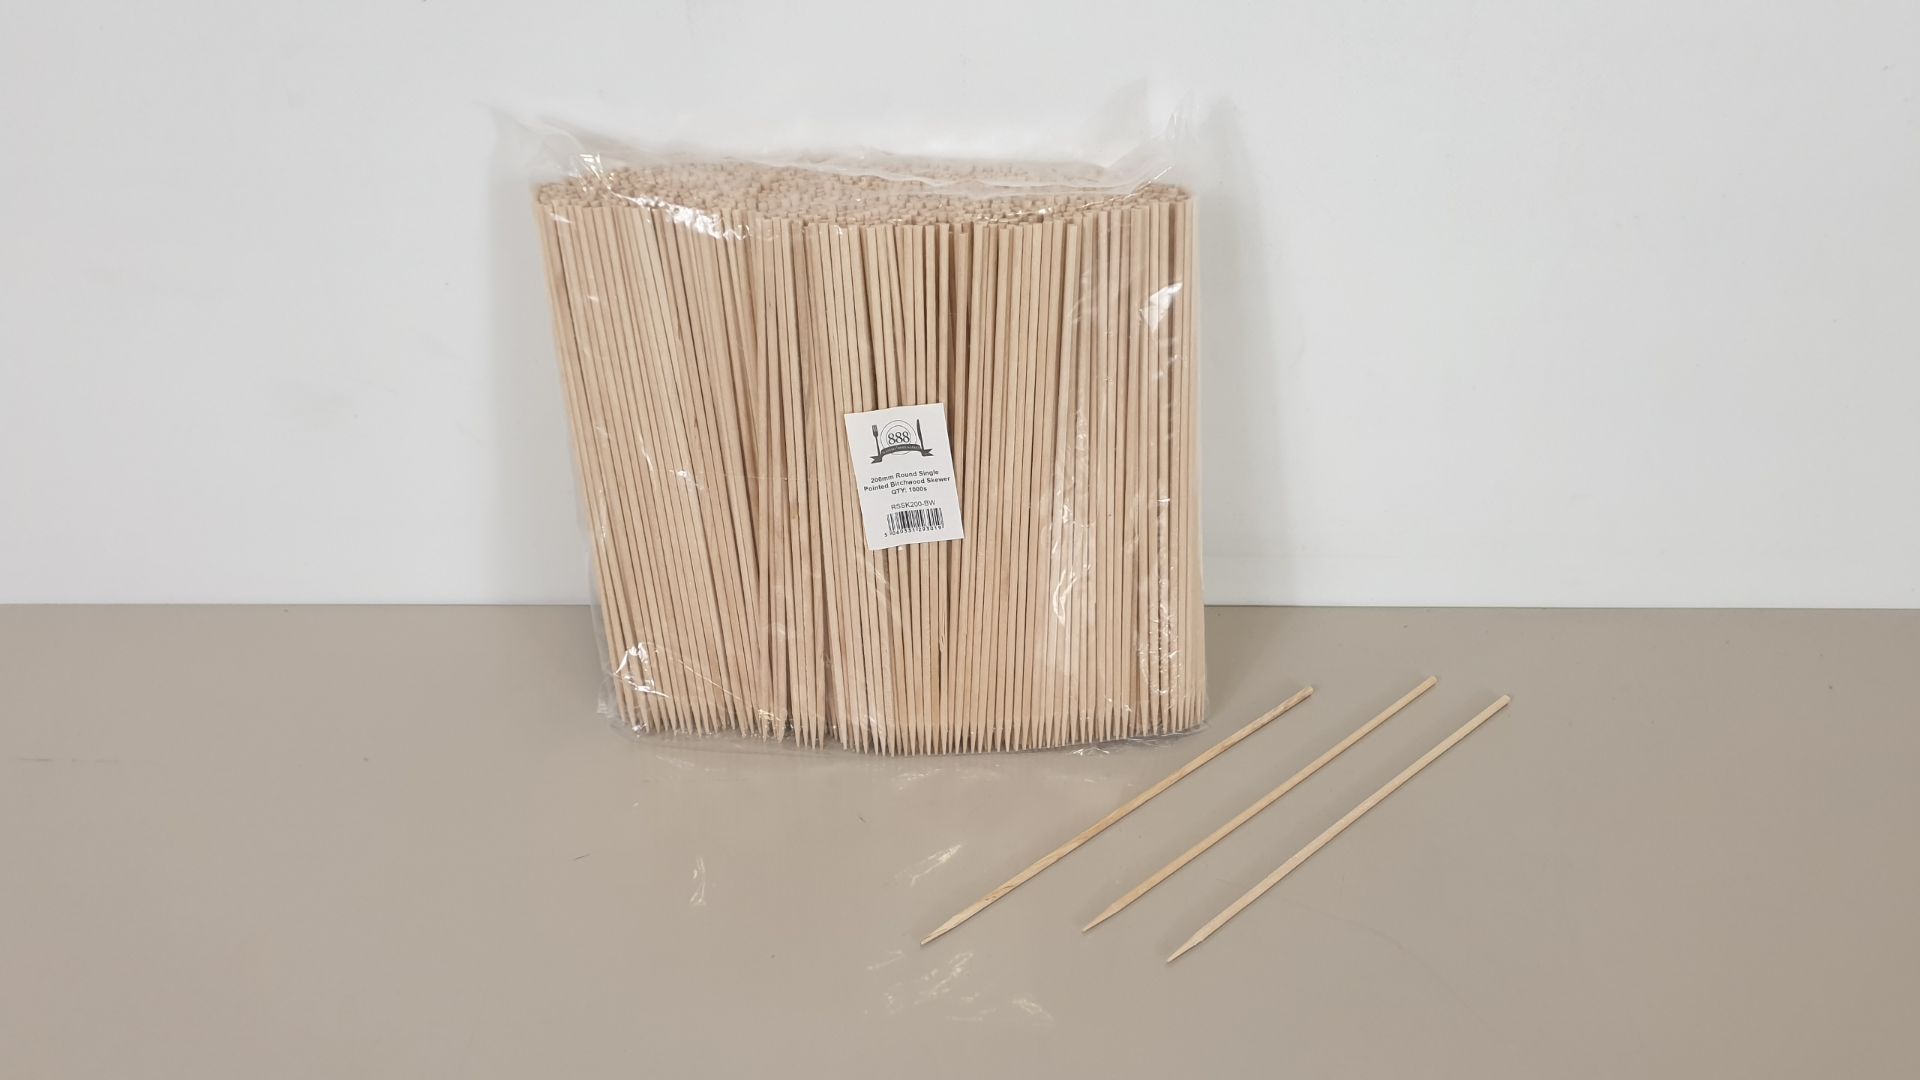 10000 X 200 MM ROUND SINGLE POINTED BIRCHWOOD SKEWERS (IDEAL FOR BBQs) - (10 X 1000) - IN 1 CARTON